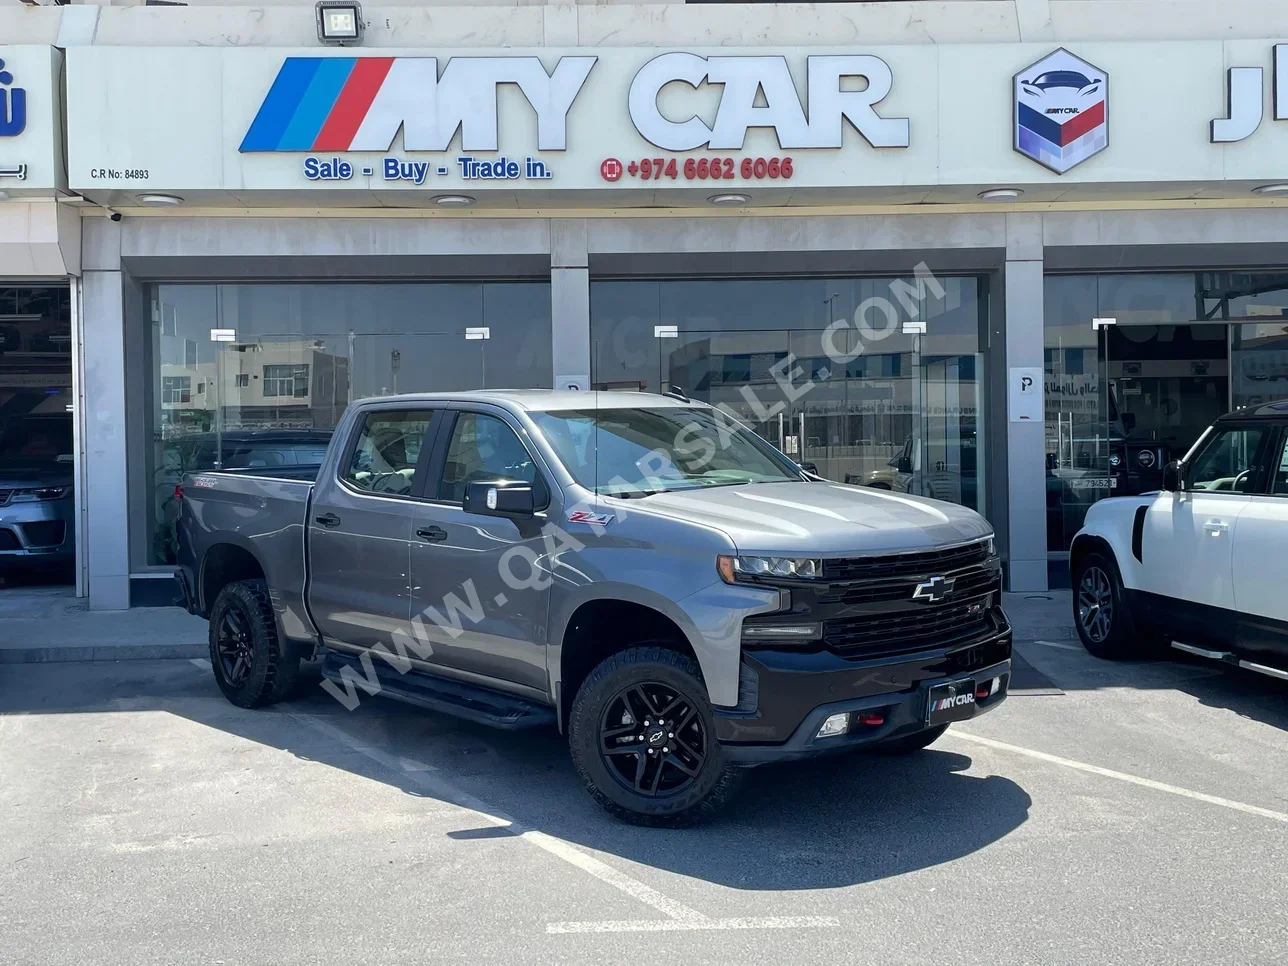 Chevrolet  Silverado  Trail Boss  2020  Automatic  36,000 Km  8 Cylinder  Four Wheel Drive (4WD)  Pick Up  Silver